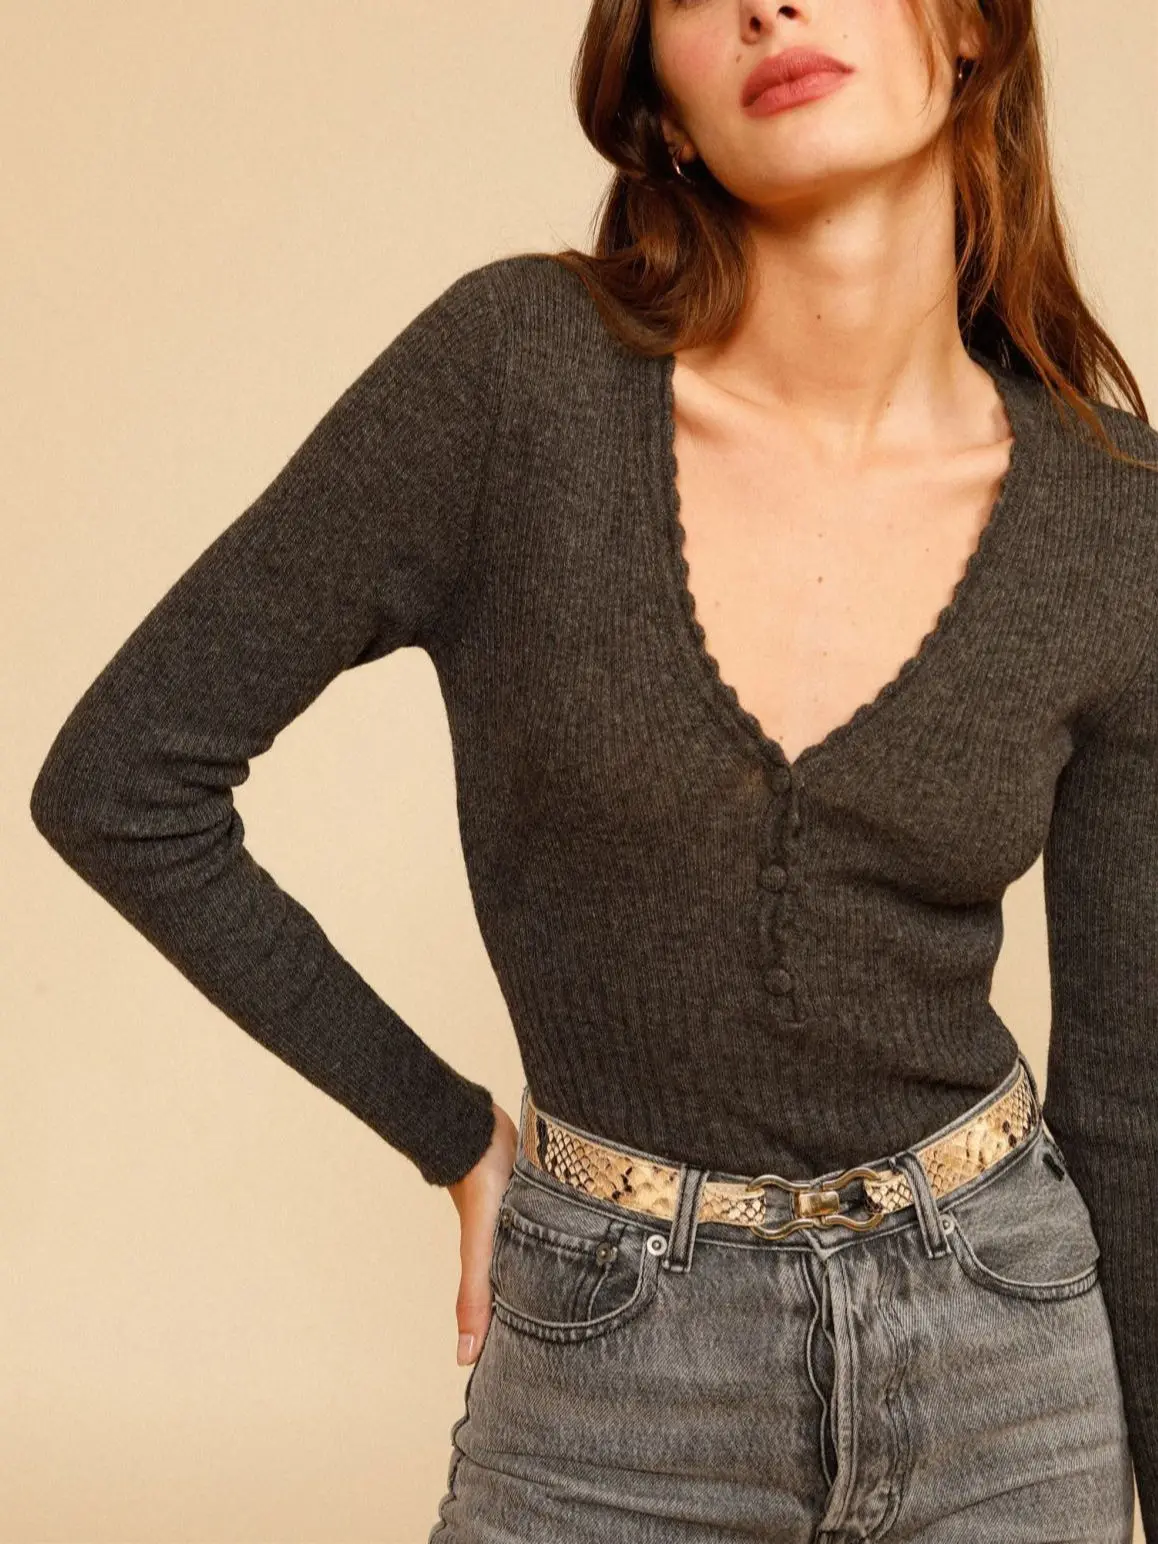 

Wavy Trim V-neck Women Knit Slim Sweater Autumn Winter Lady Long-Sleeved Knitwear Bottoming Pullover Top Front With Buttons